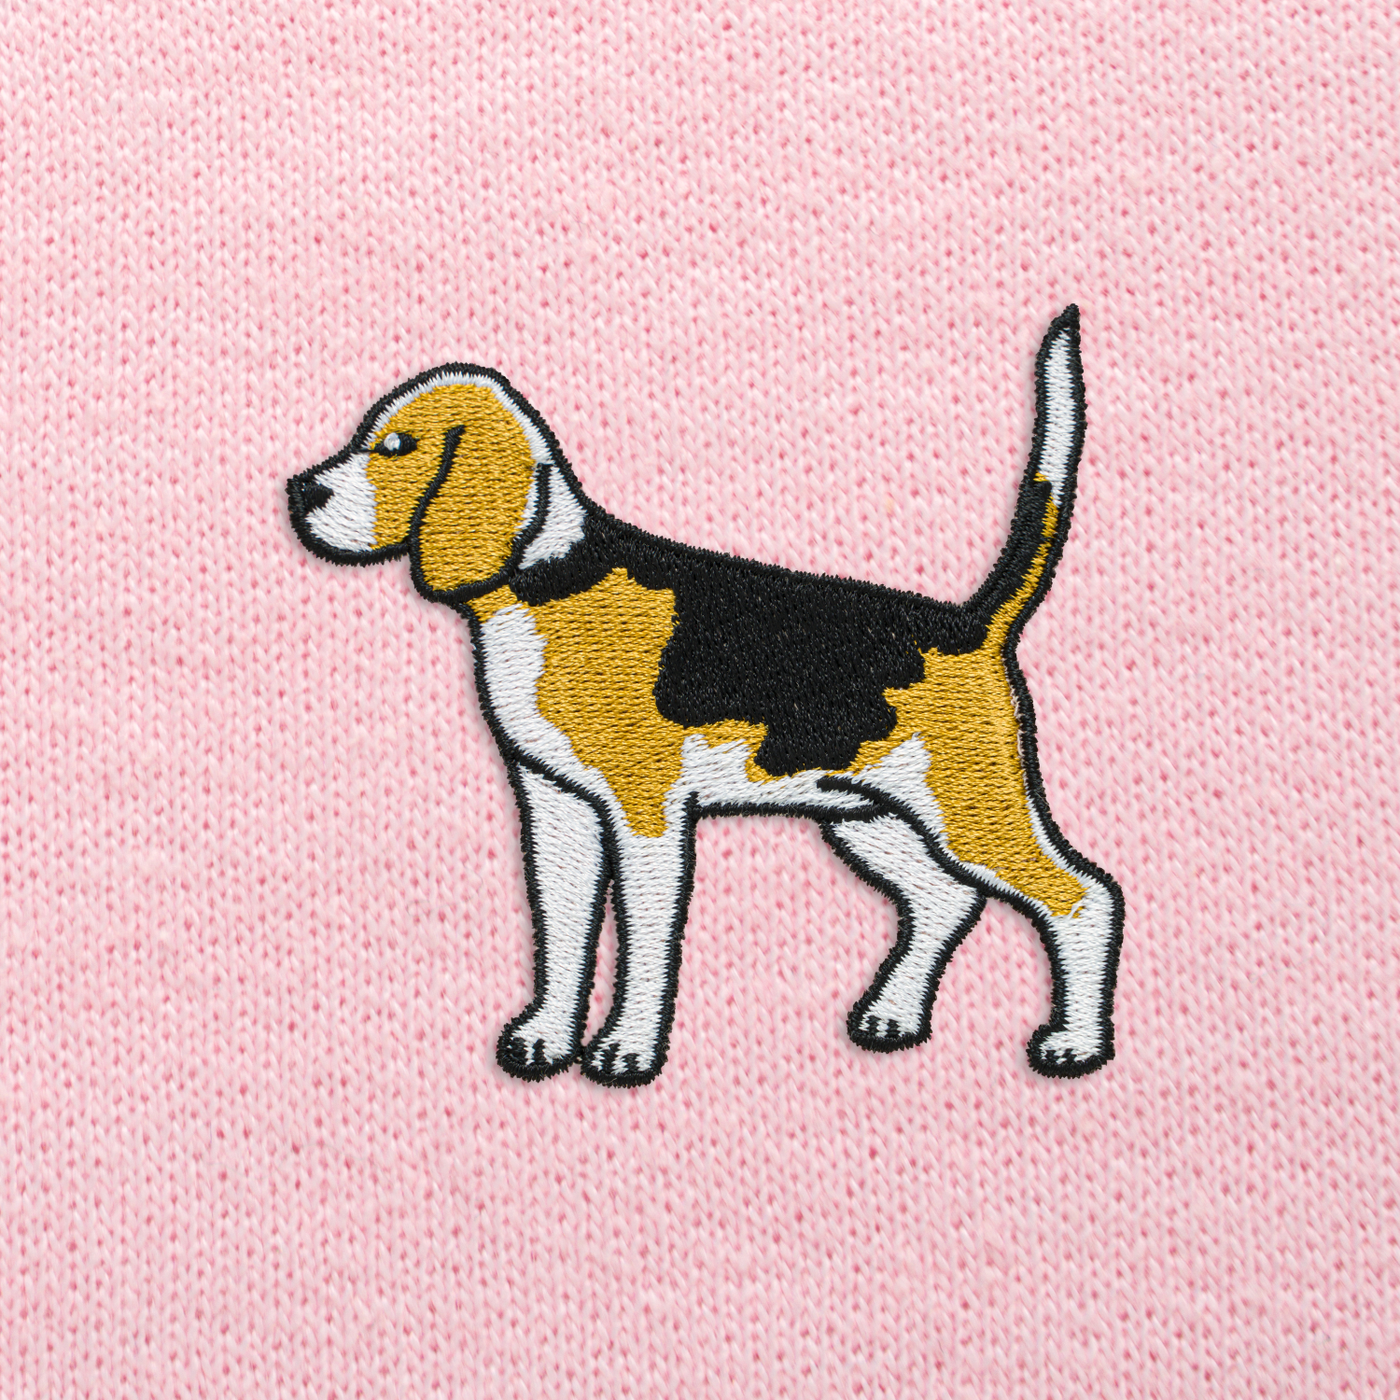 Bobby's Planet Women's Embroidered Beagle Sweatshirt from Paws Dog Cat Animals Collection in Light Pink Color#color_light-pink